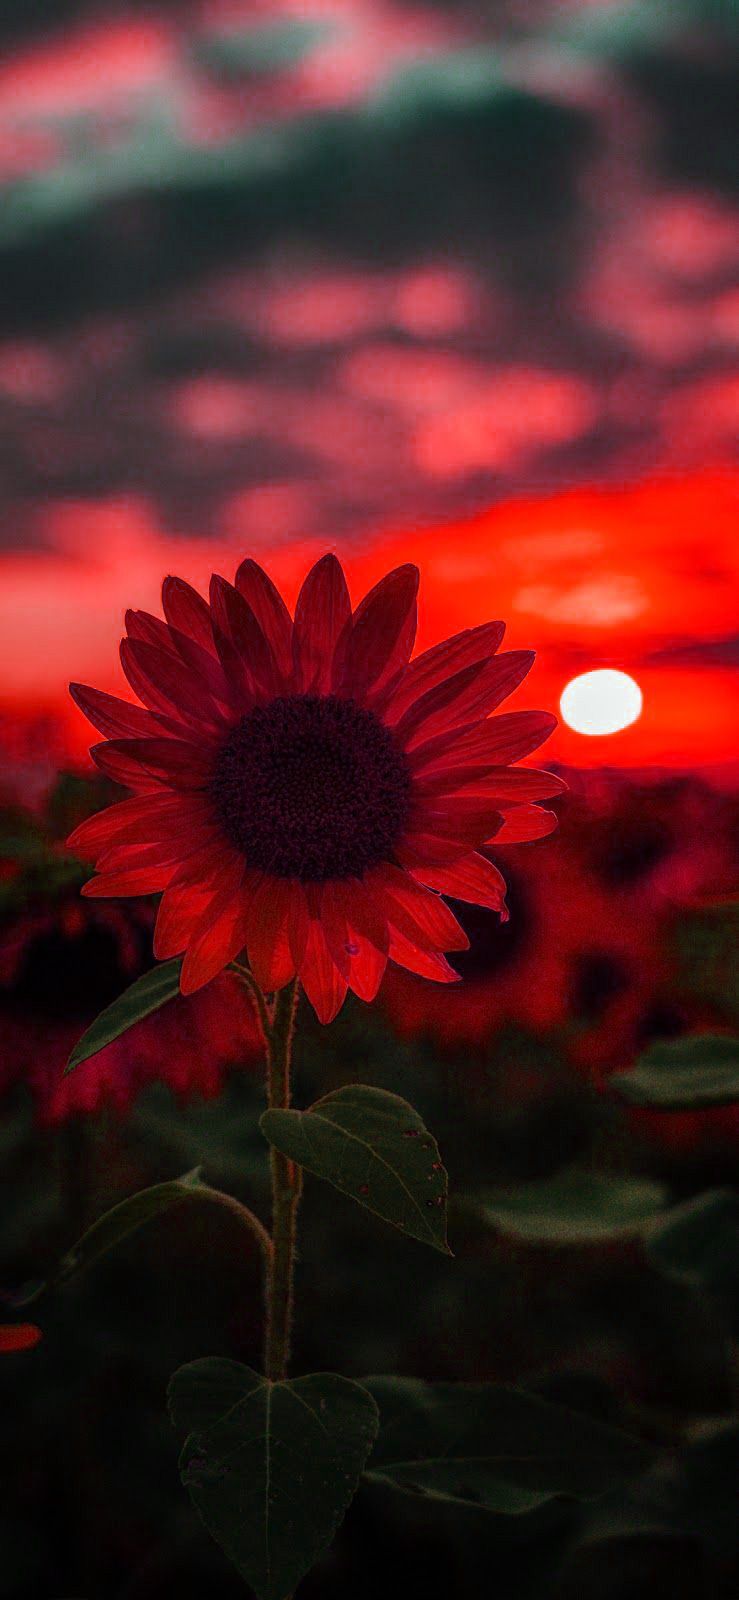 A red sunflower in front of a red sunset - Sunflower